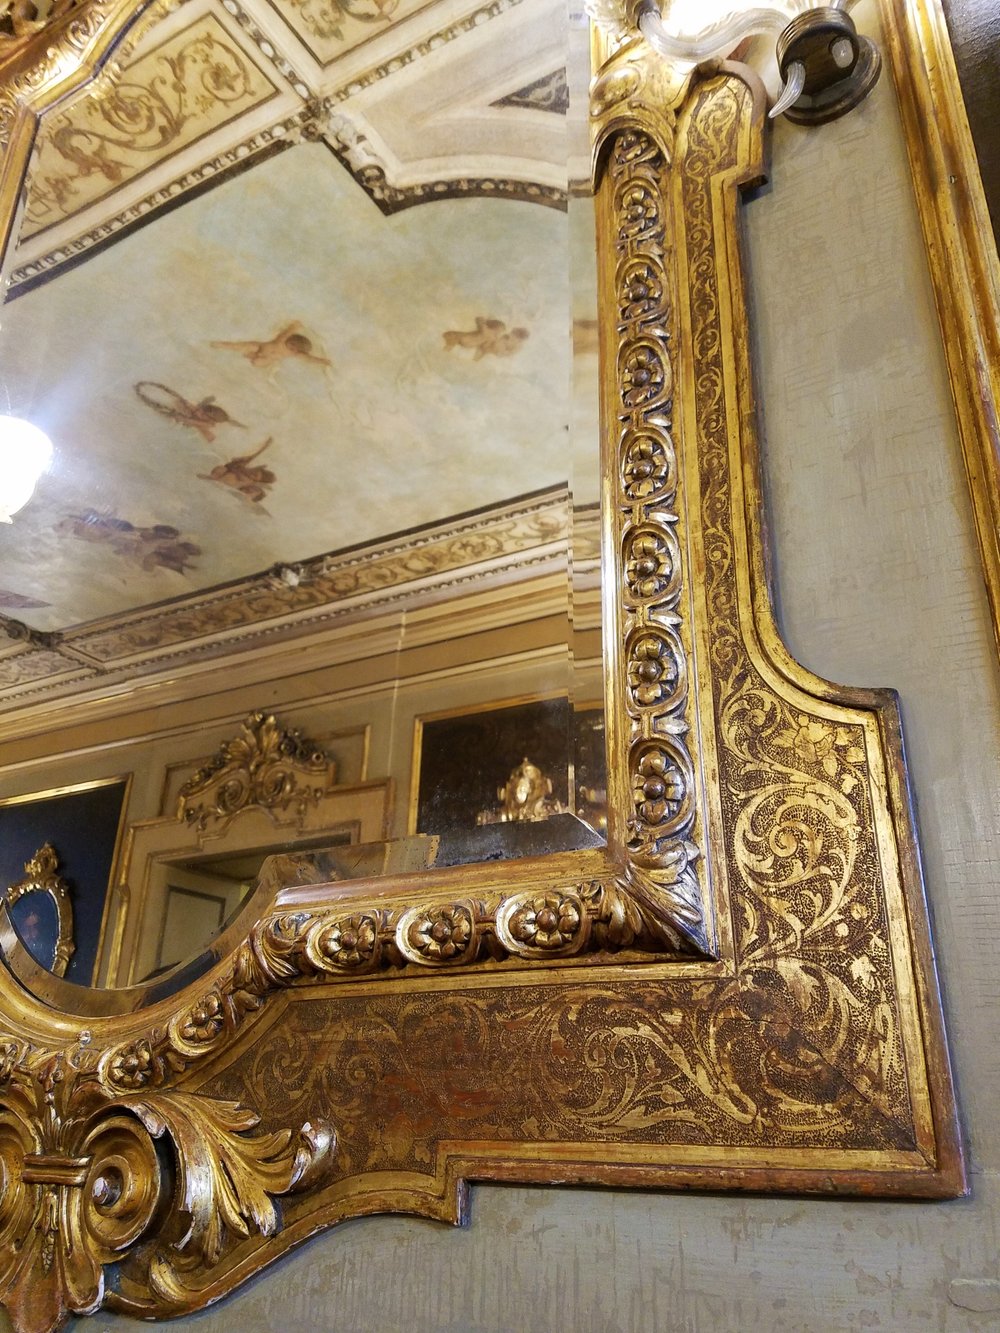 One of the mirrors at Caffè Florian